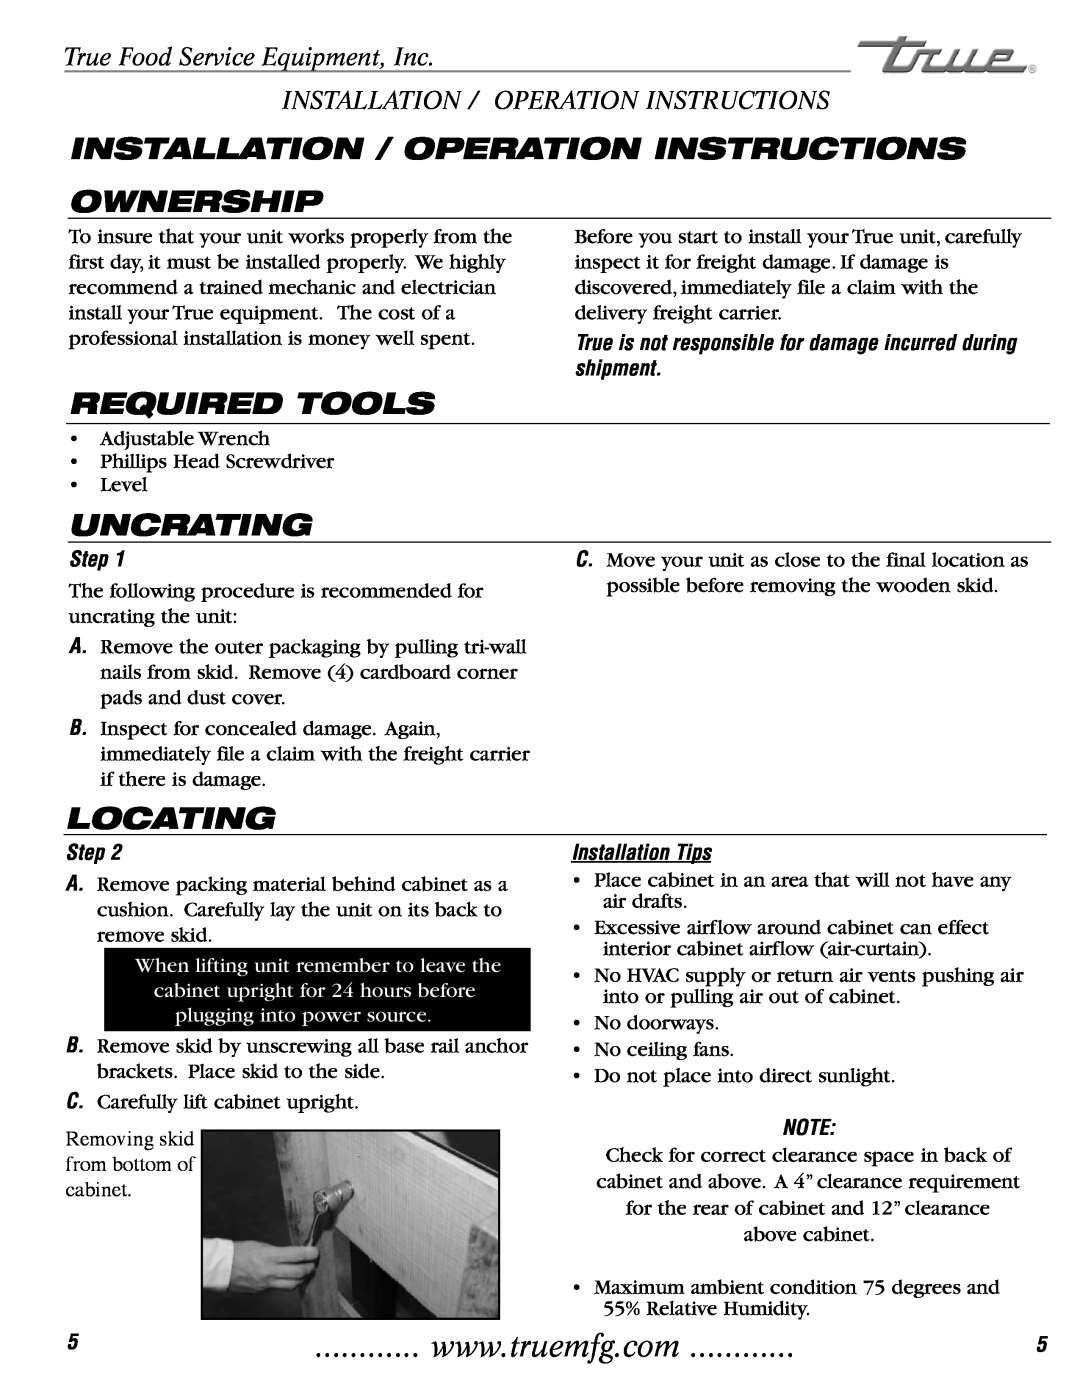 True Manufacturing Company TAC-36 Installation / Operation Instructions Ownership, Required Tools, Uncrating, Locating 